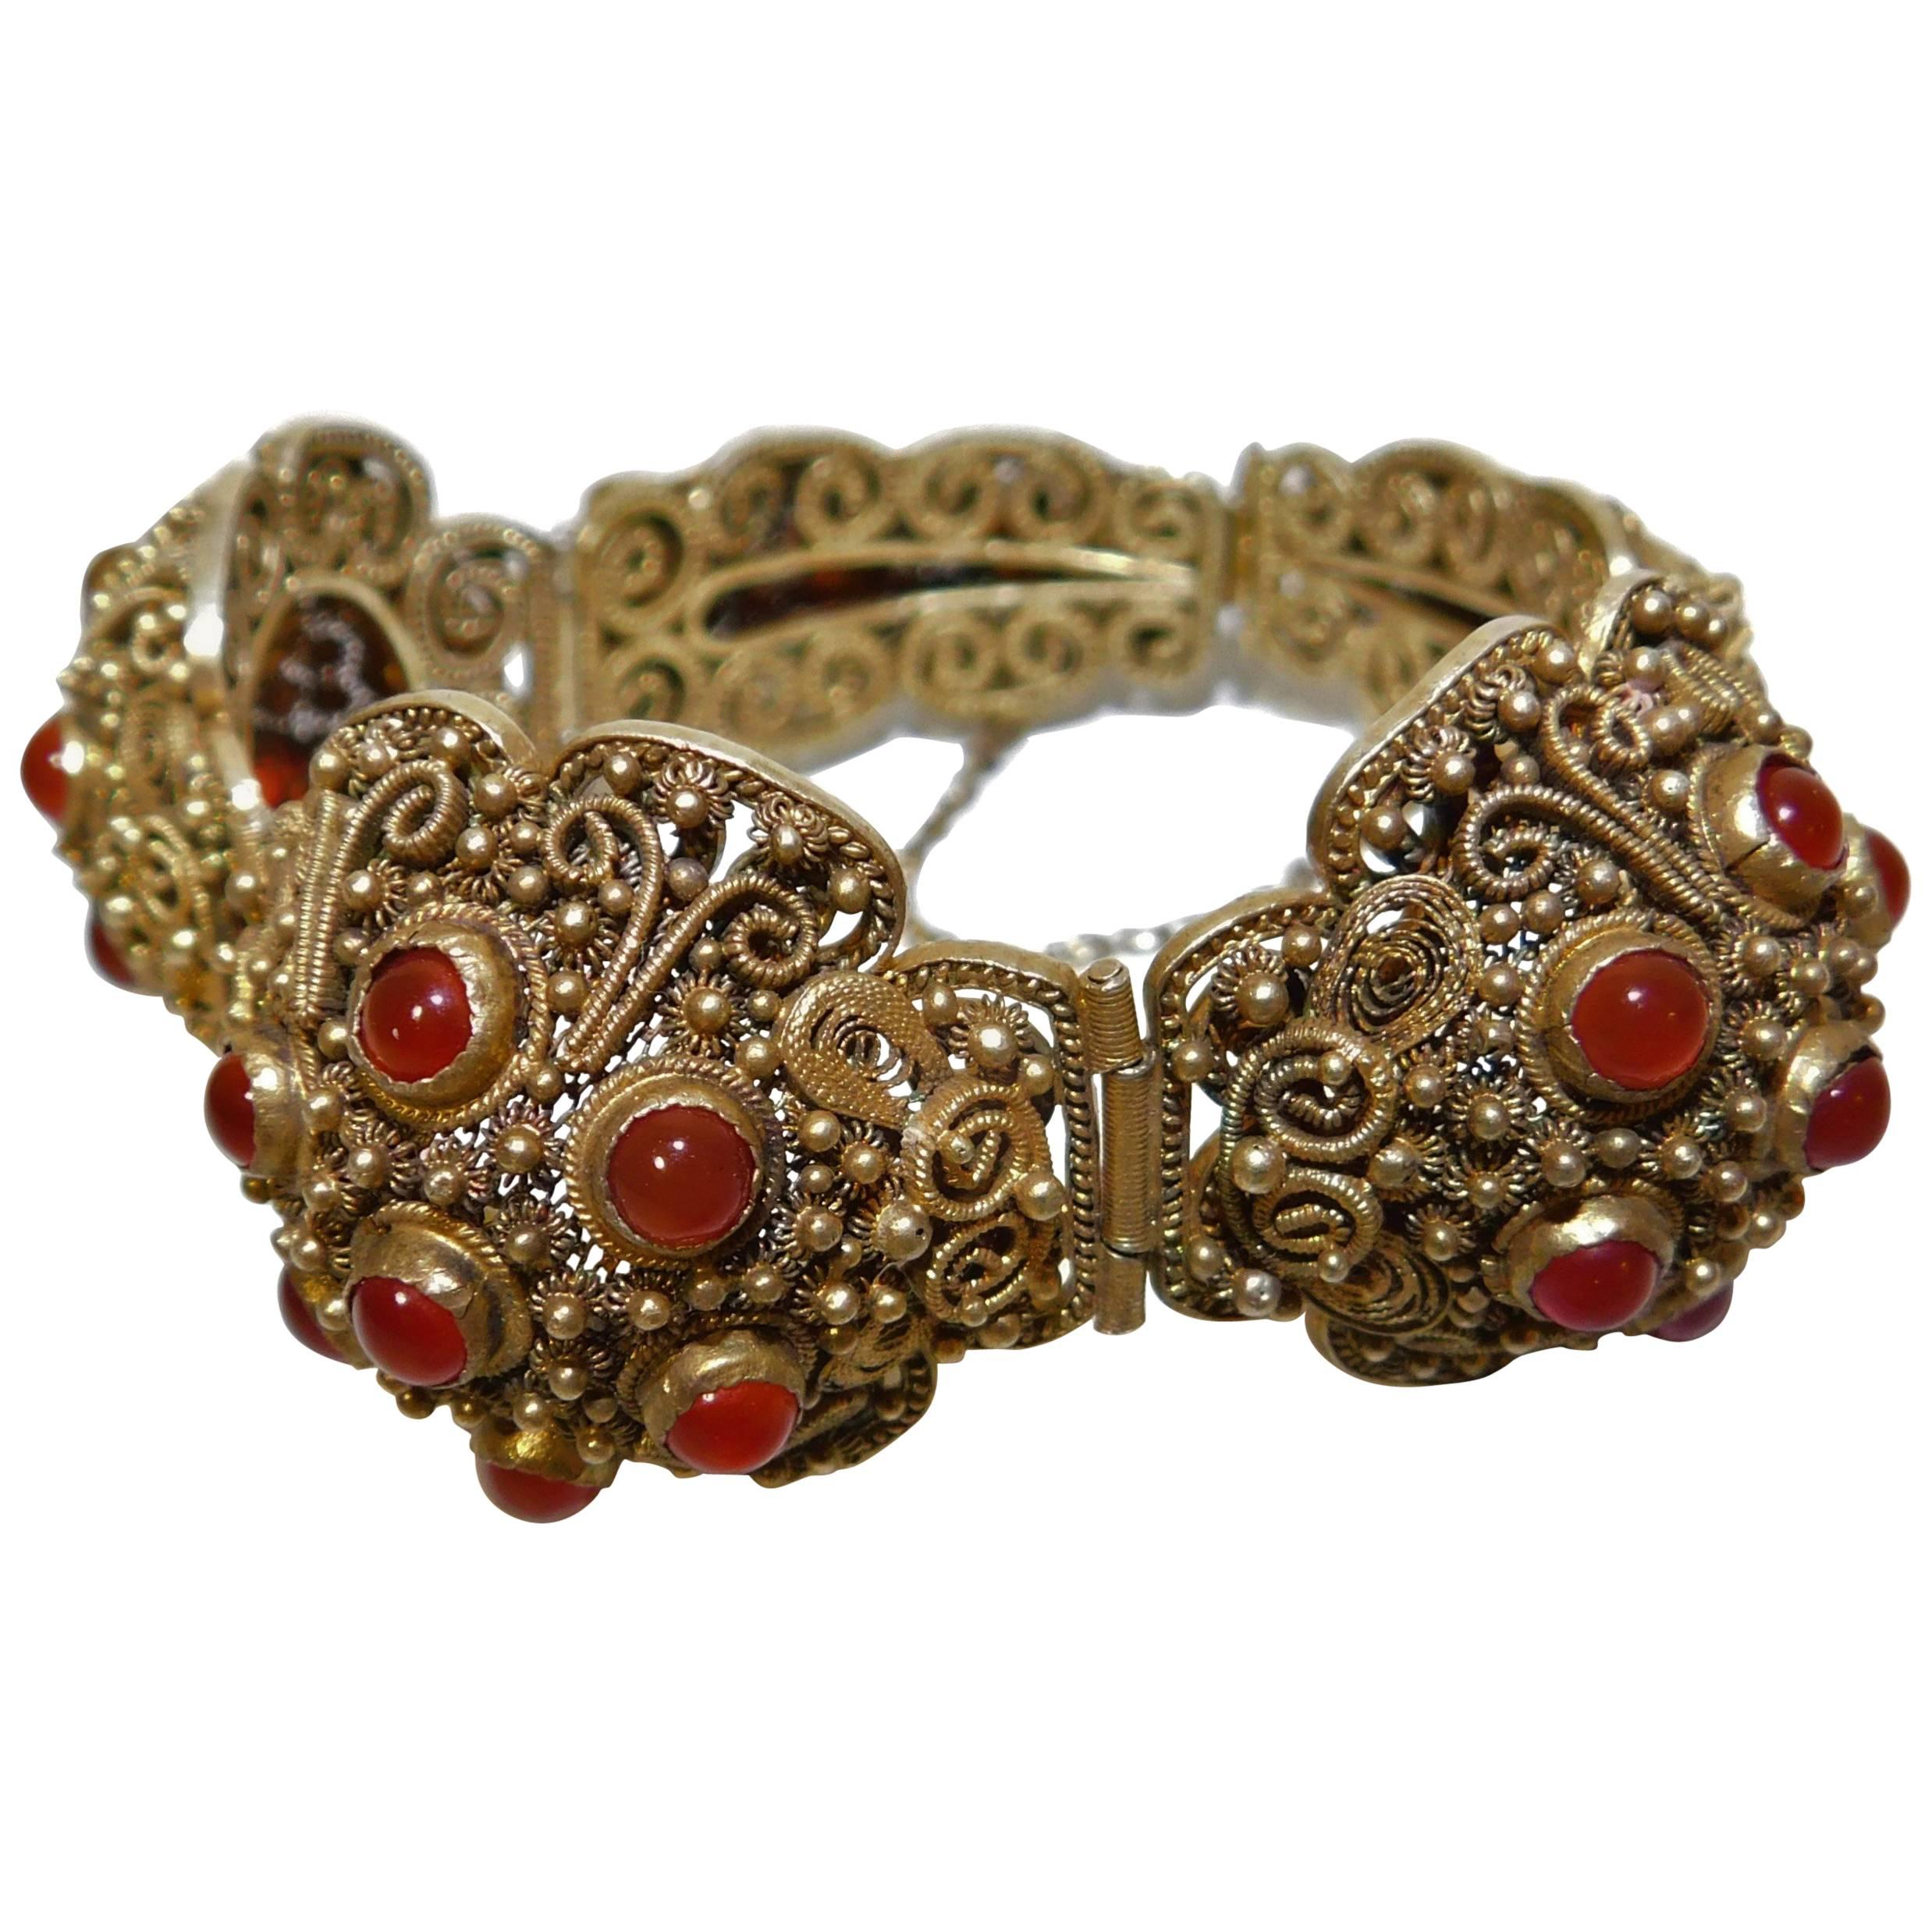 Early 20th Century Chinese Silver Gold Gilt Bracelet with 26 Carnelian Stones